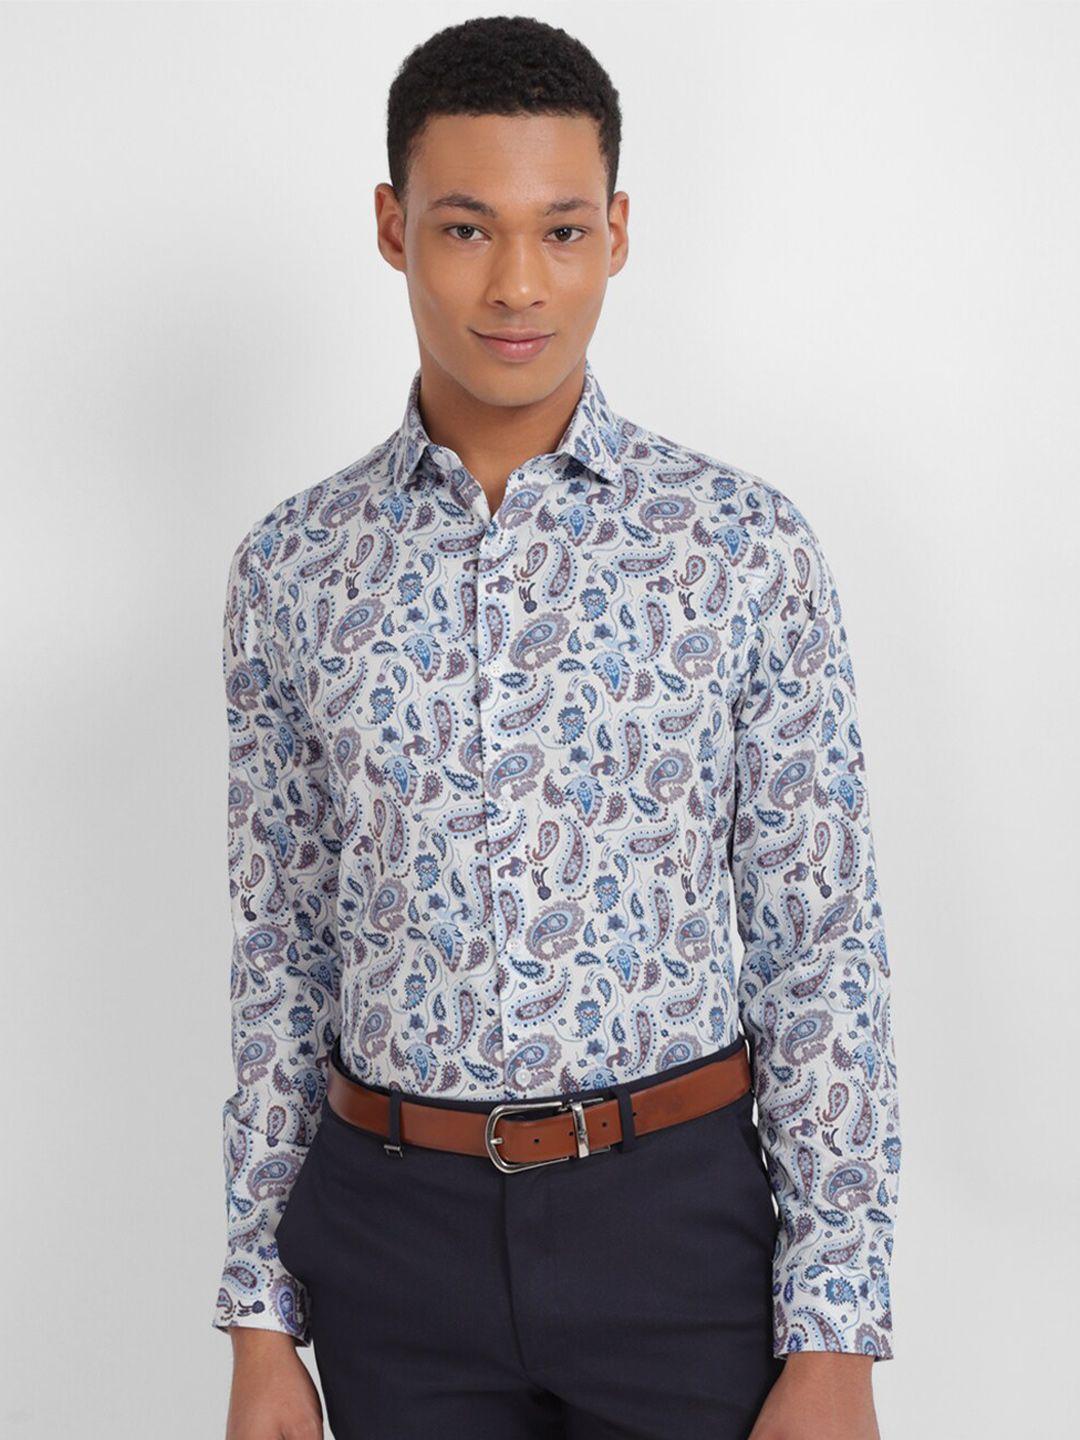 allen solly slim fit ethnic motifs printed pure cotton formal shirt